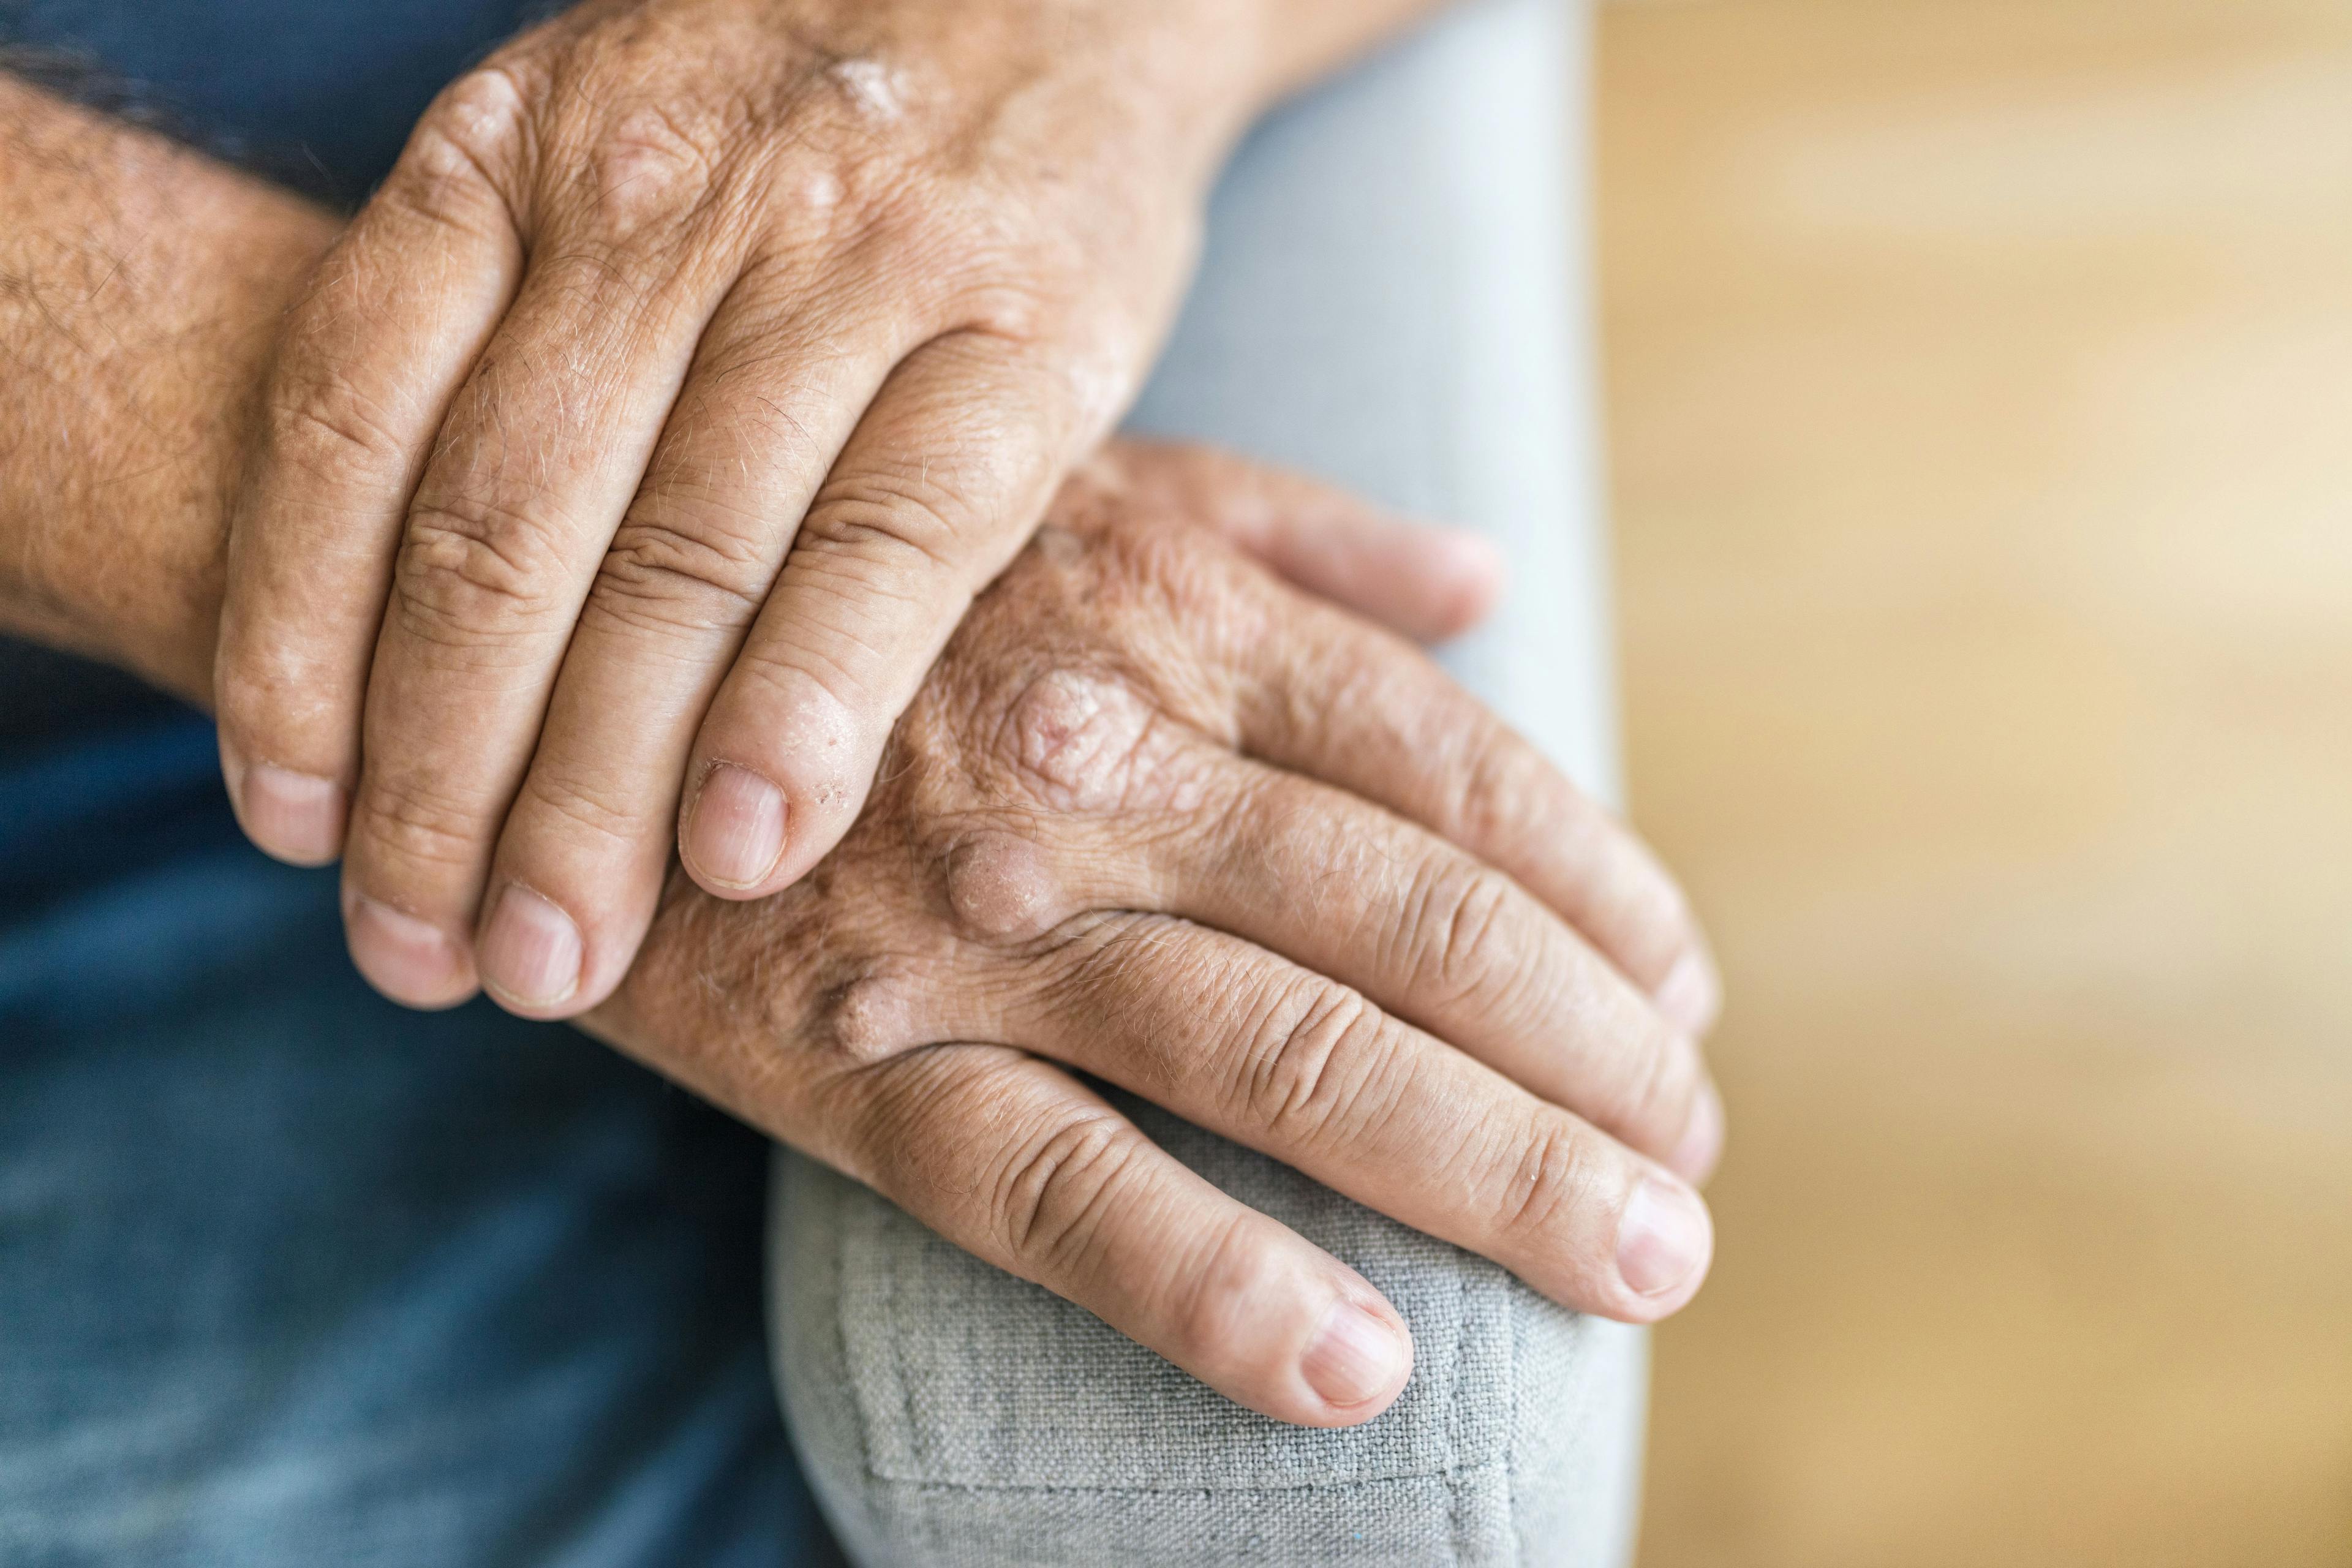 Elderly man suffering from psoriasis on hands | Image Credit: and.one - stock.adobe.com